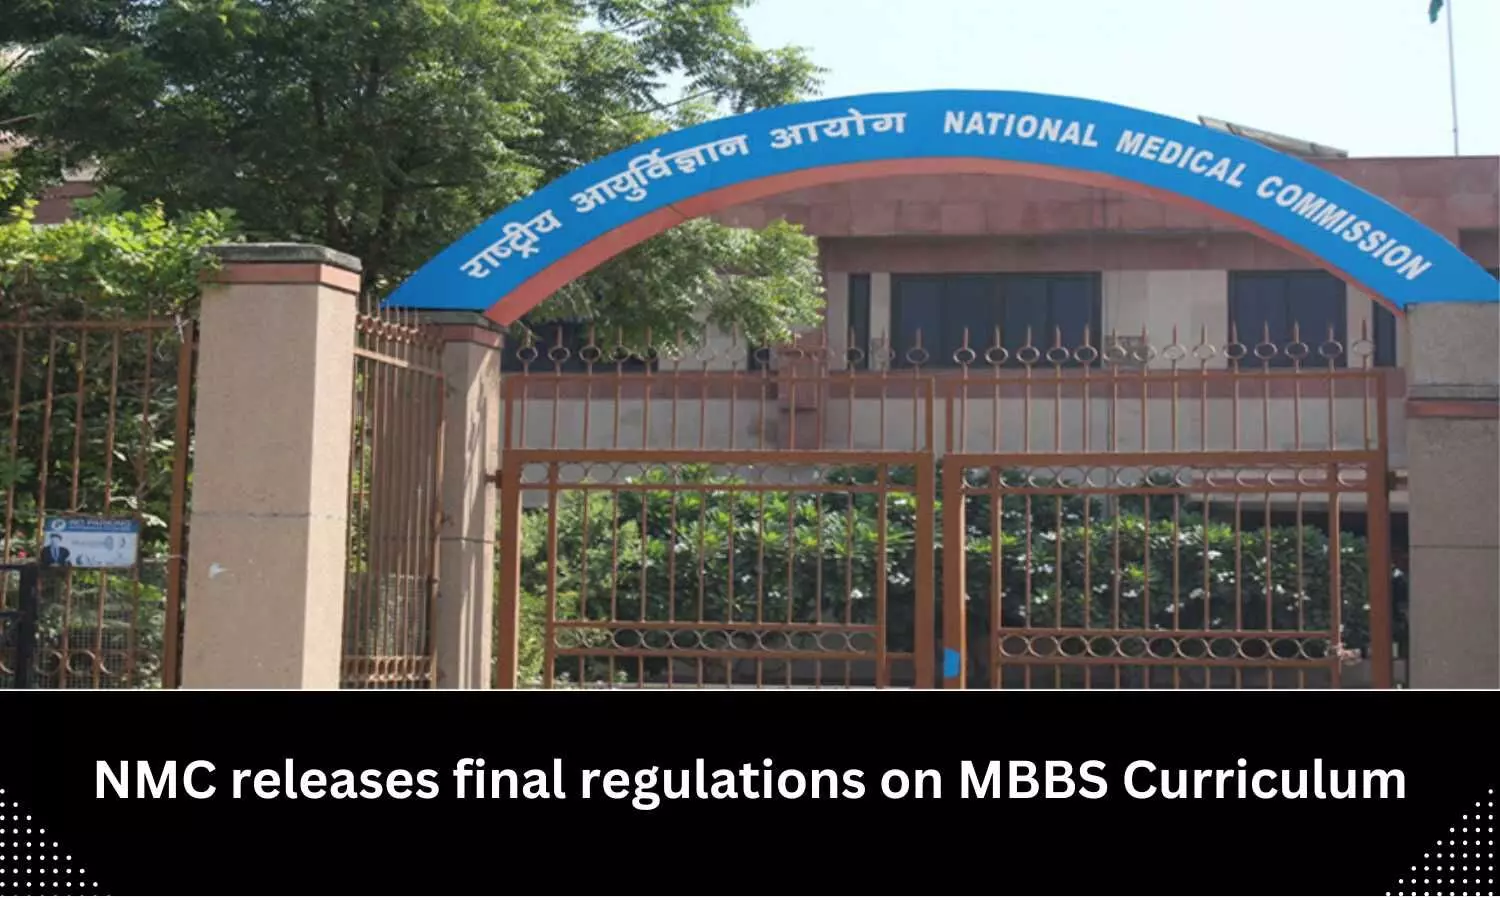 Final regulations on MBBS Curriculum released by NMC